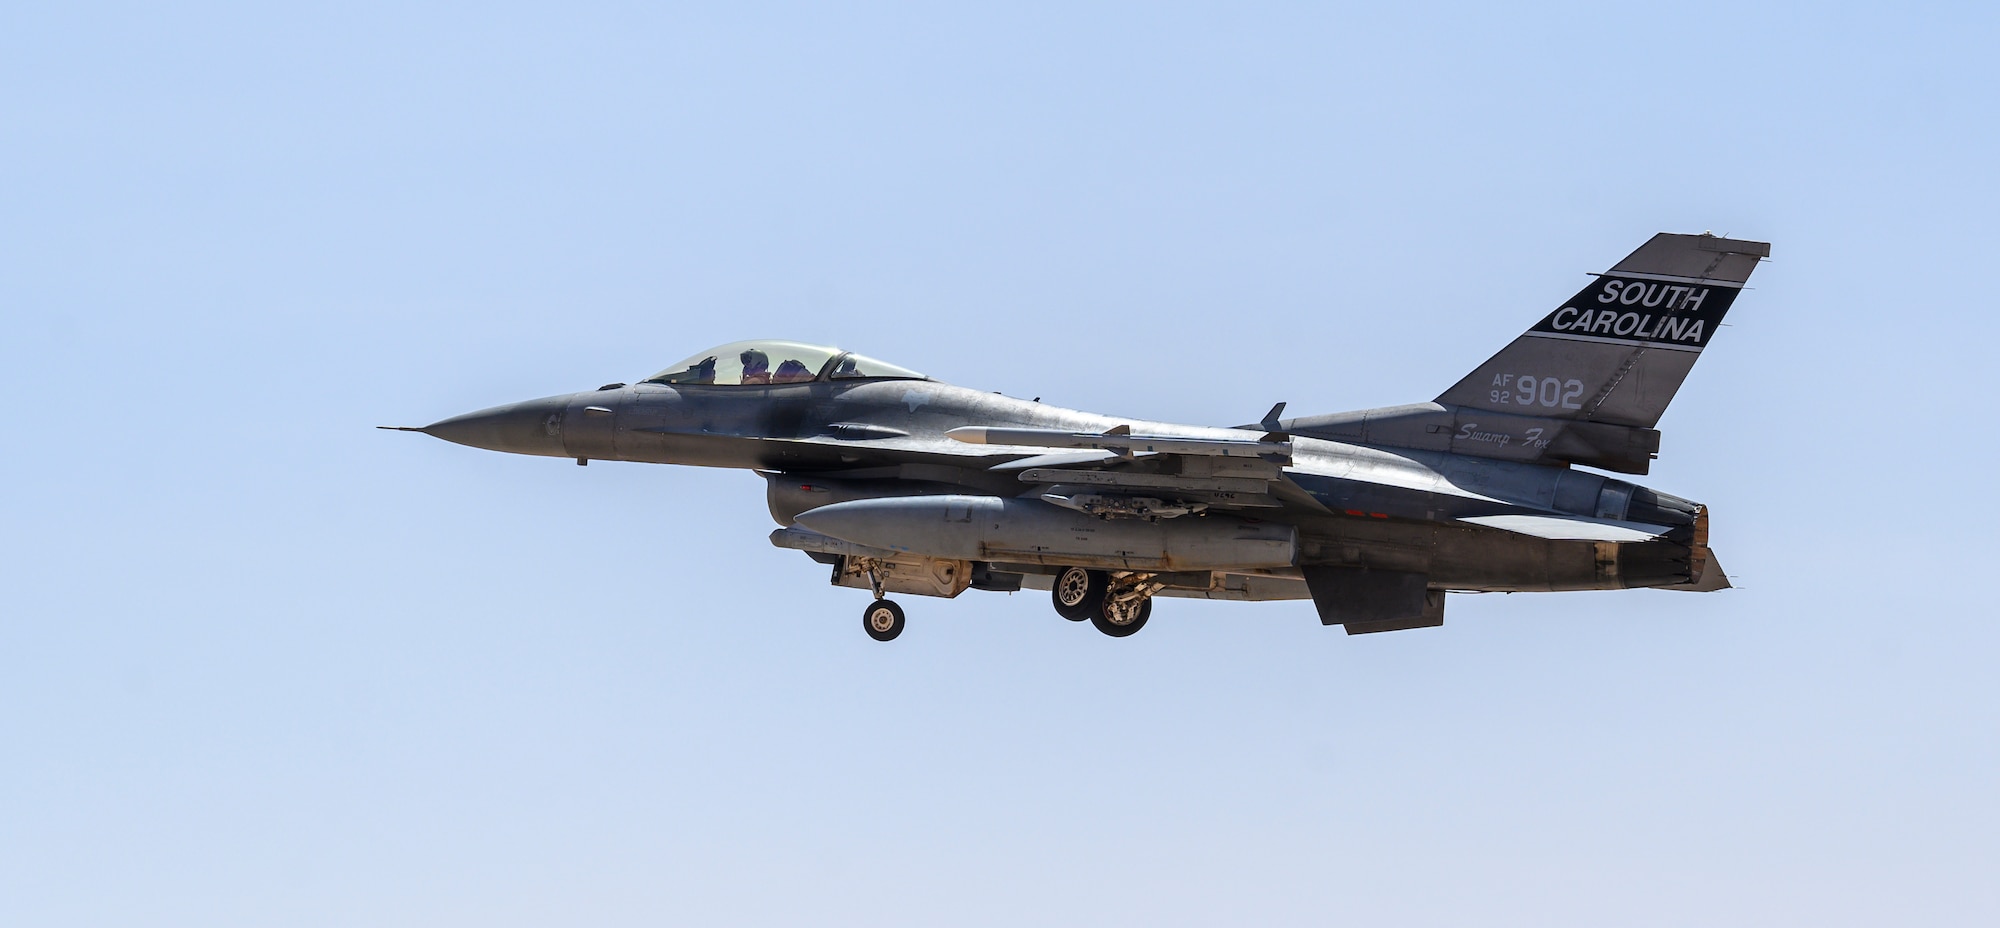 U.S. Air Force Brig. Gen. Robert Davis, 378th Air Expeditionary Wing commander, takes-off in a U.S. Air Force F-16 Fighting Falcon from Prince Sultan Air Base, Kingdom of Saudi Arabia, June 20, 2021. Davis, a trained fighter pilot, flew a sortie with the 157th “Swamp Fox” Expeditionary Fighter Squadron, currently deployed to PSAB to bolster defensive capabilities against potential threats in the region. (U.S. Air Force photo by Senior Airman Samuel Earick)